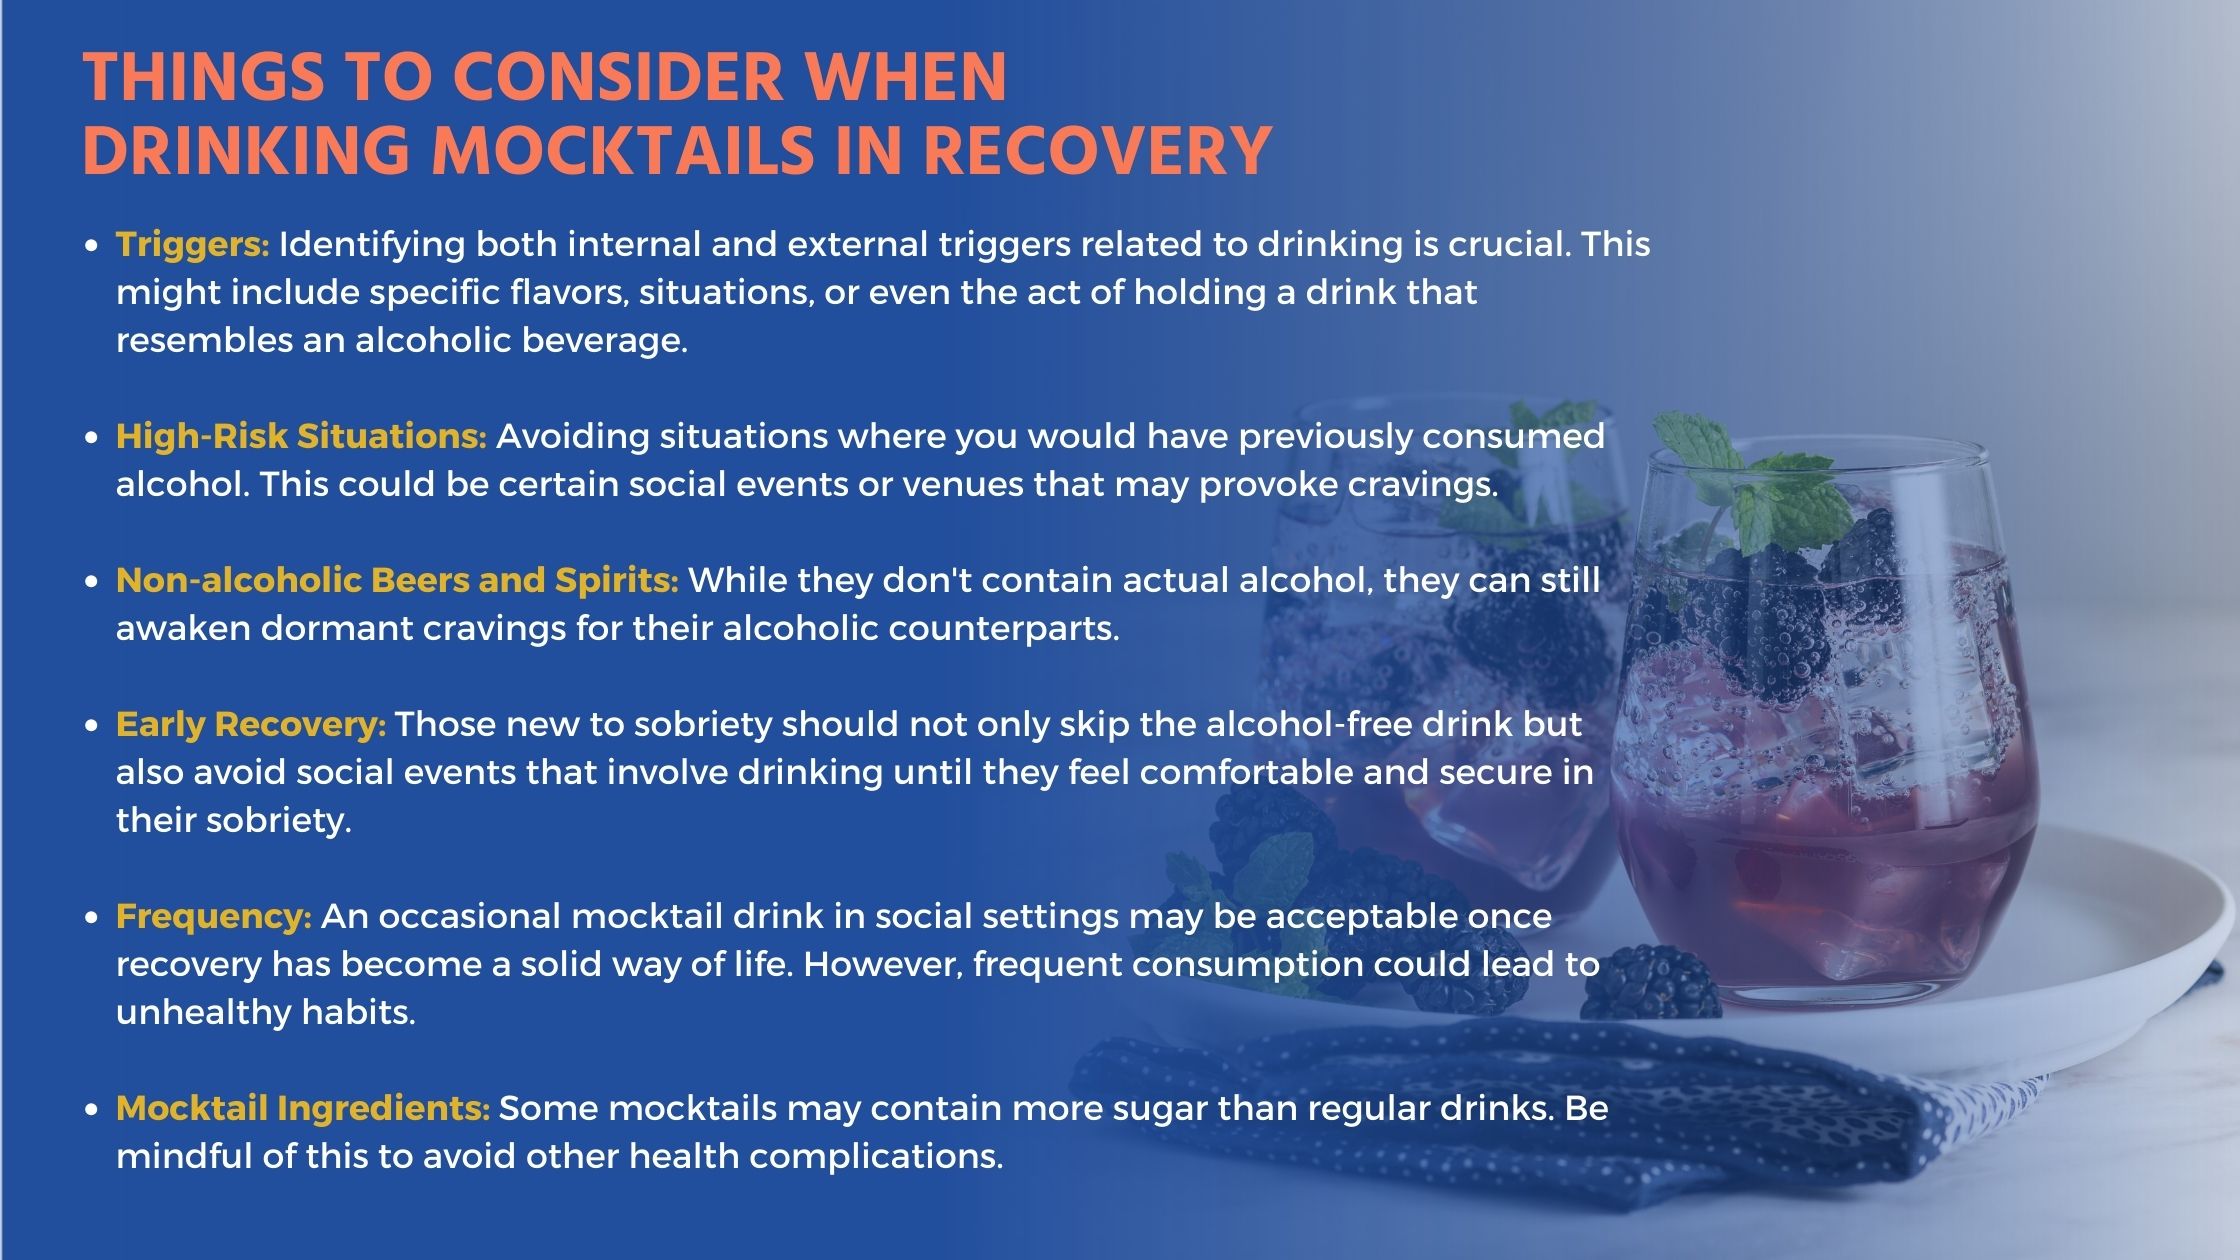 Things to Consider When Drinking Mocktails in Recovery